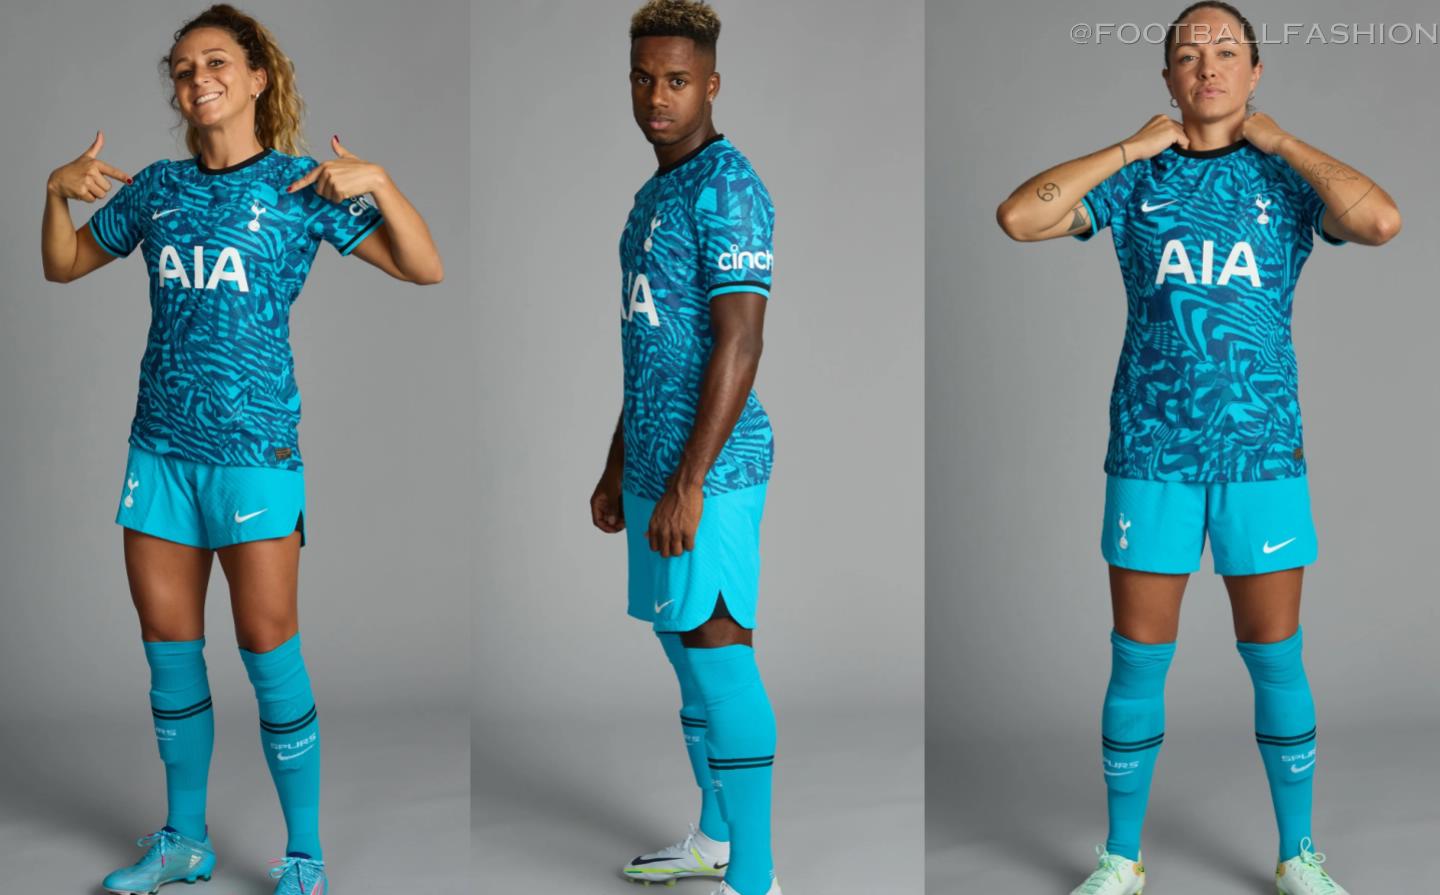 Tottenham Hotspur third Kit 2019/20: Spurs release retro Nike strip to be  used for Champions League games